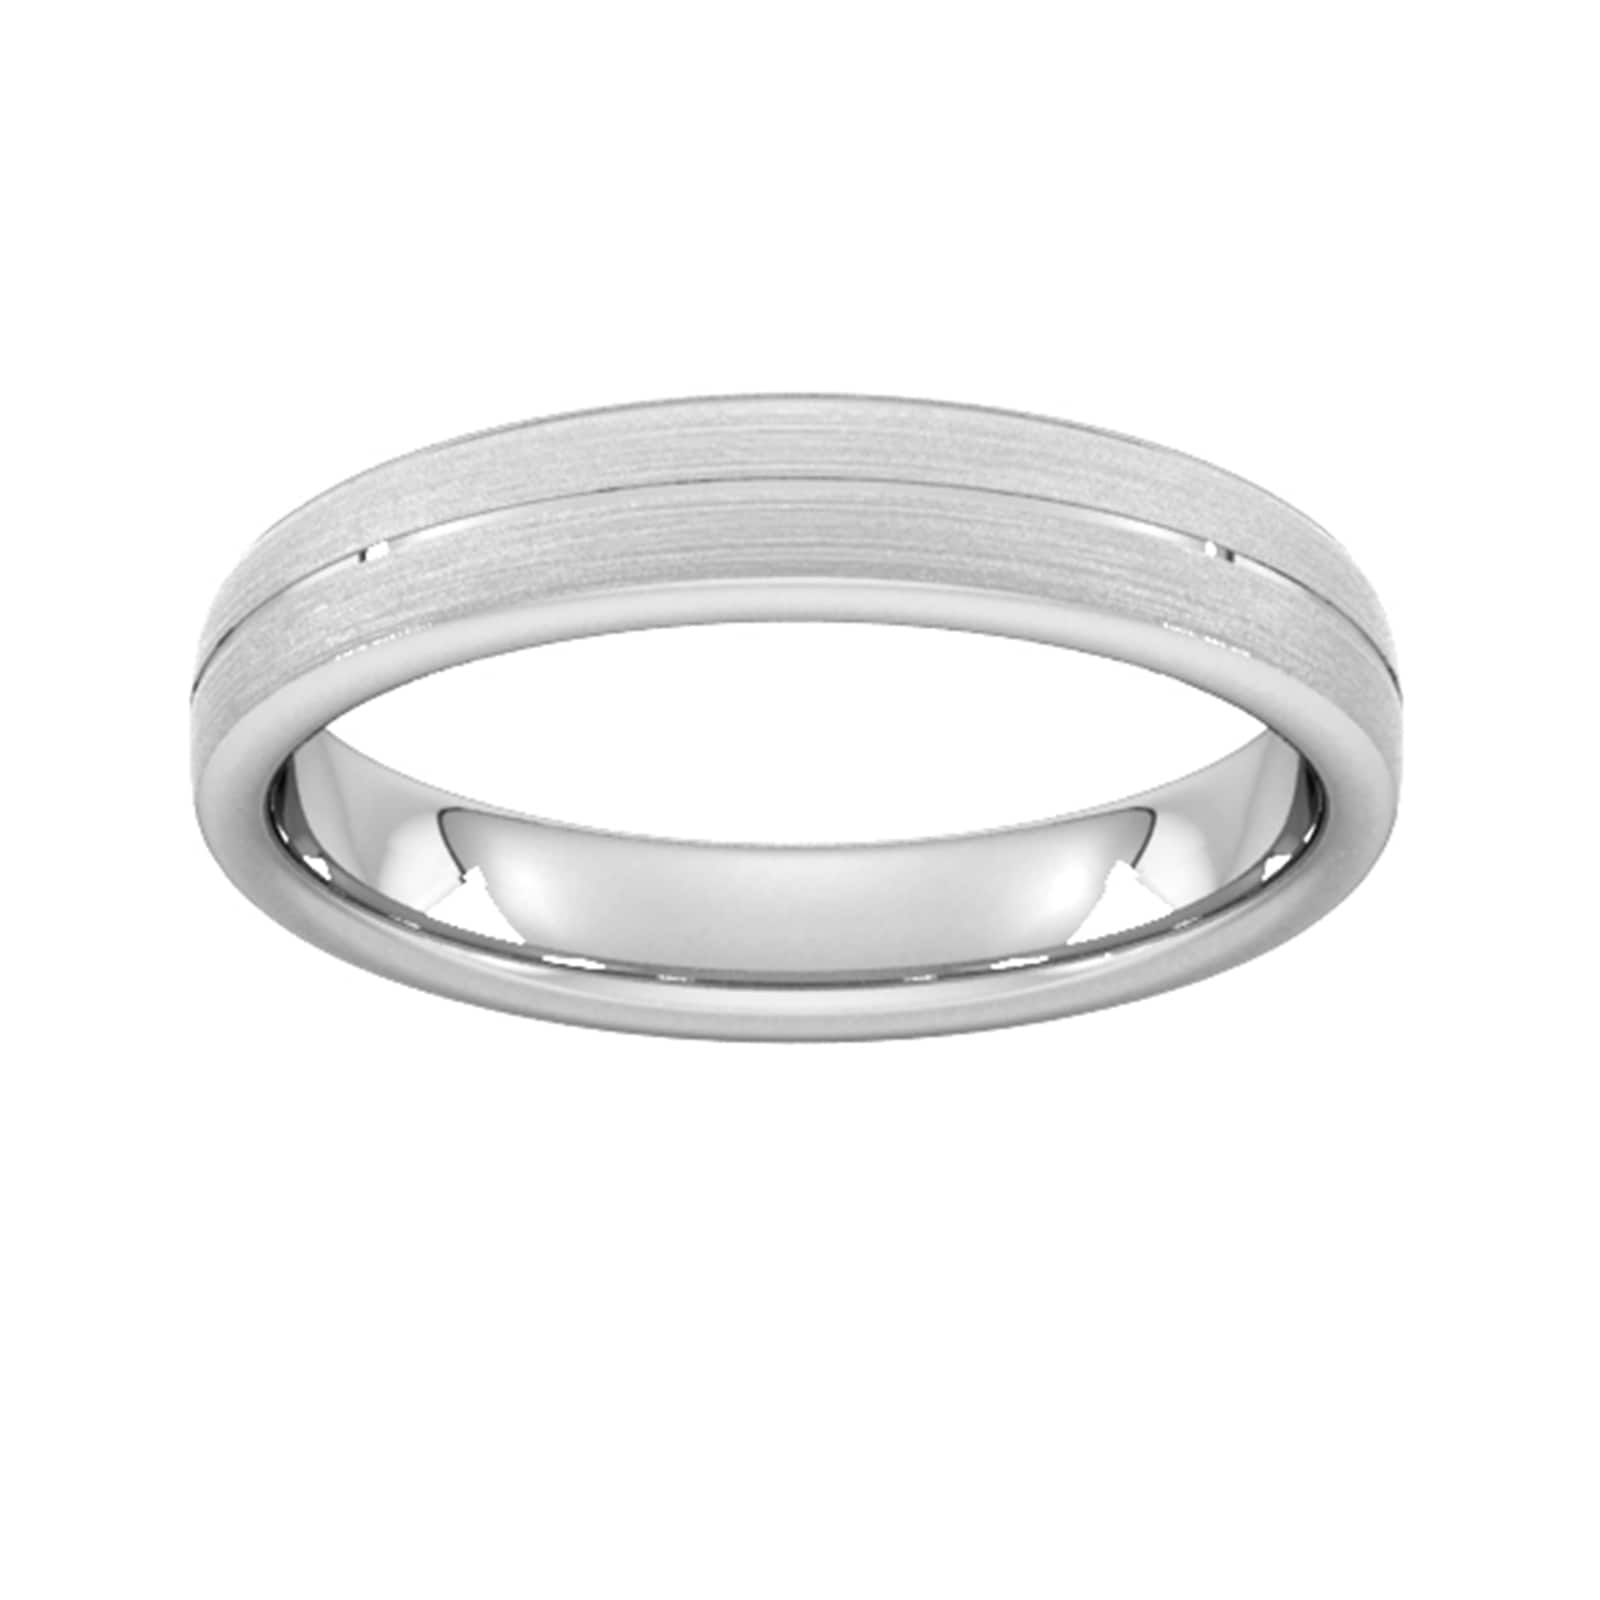 4mm Slight Court Standard Centre Groove With Chamfered Edge Wedding Ring In 18 Carat White Gold - Ring Size U